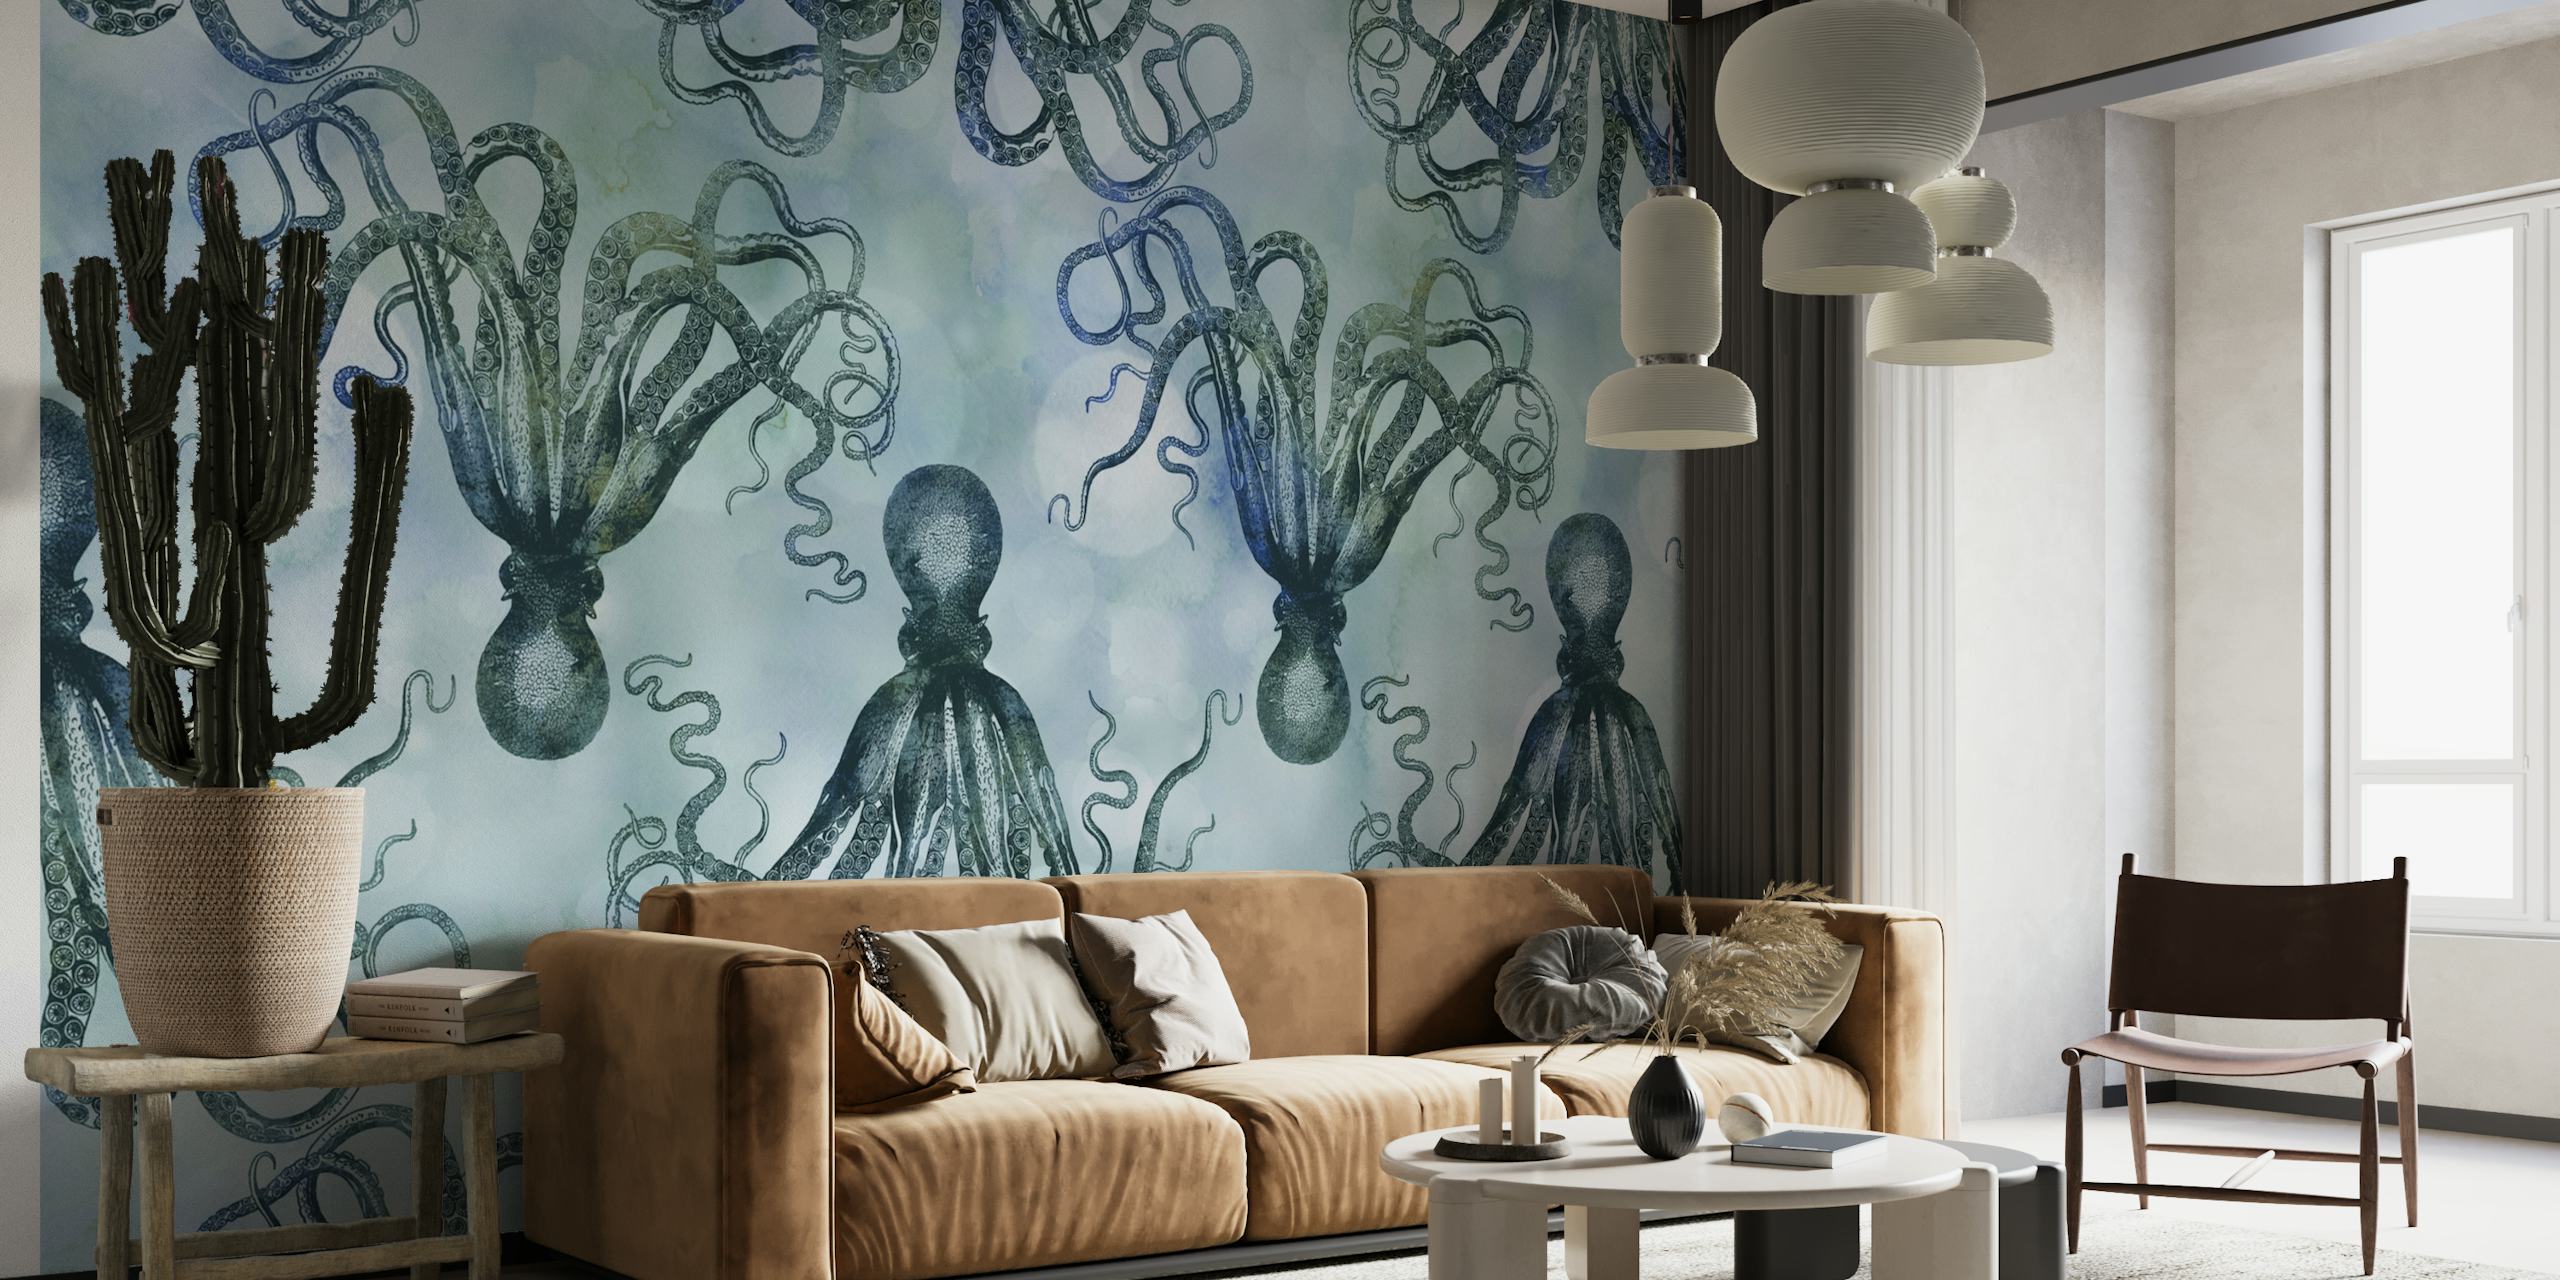 Graceful octopuses in shades of blue drifting serenely on a wall mural